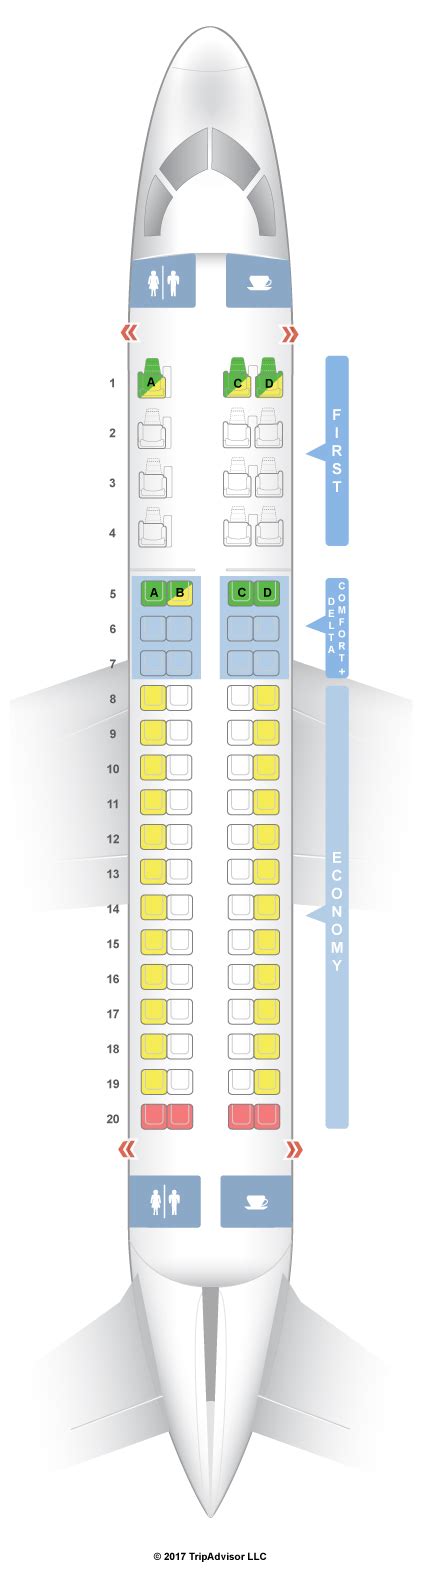 For your next Delta flight, use this seating chart to get 